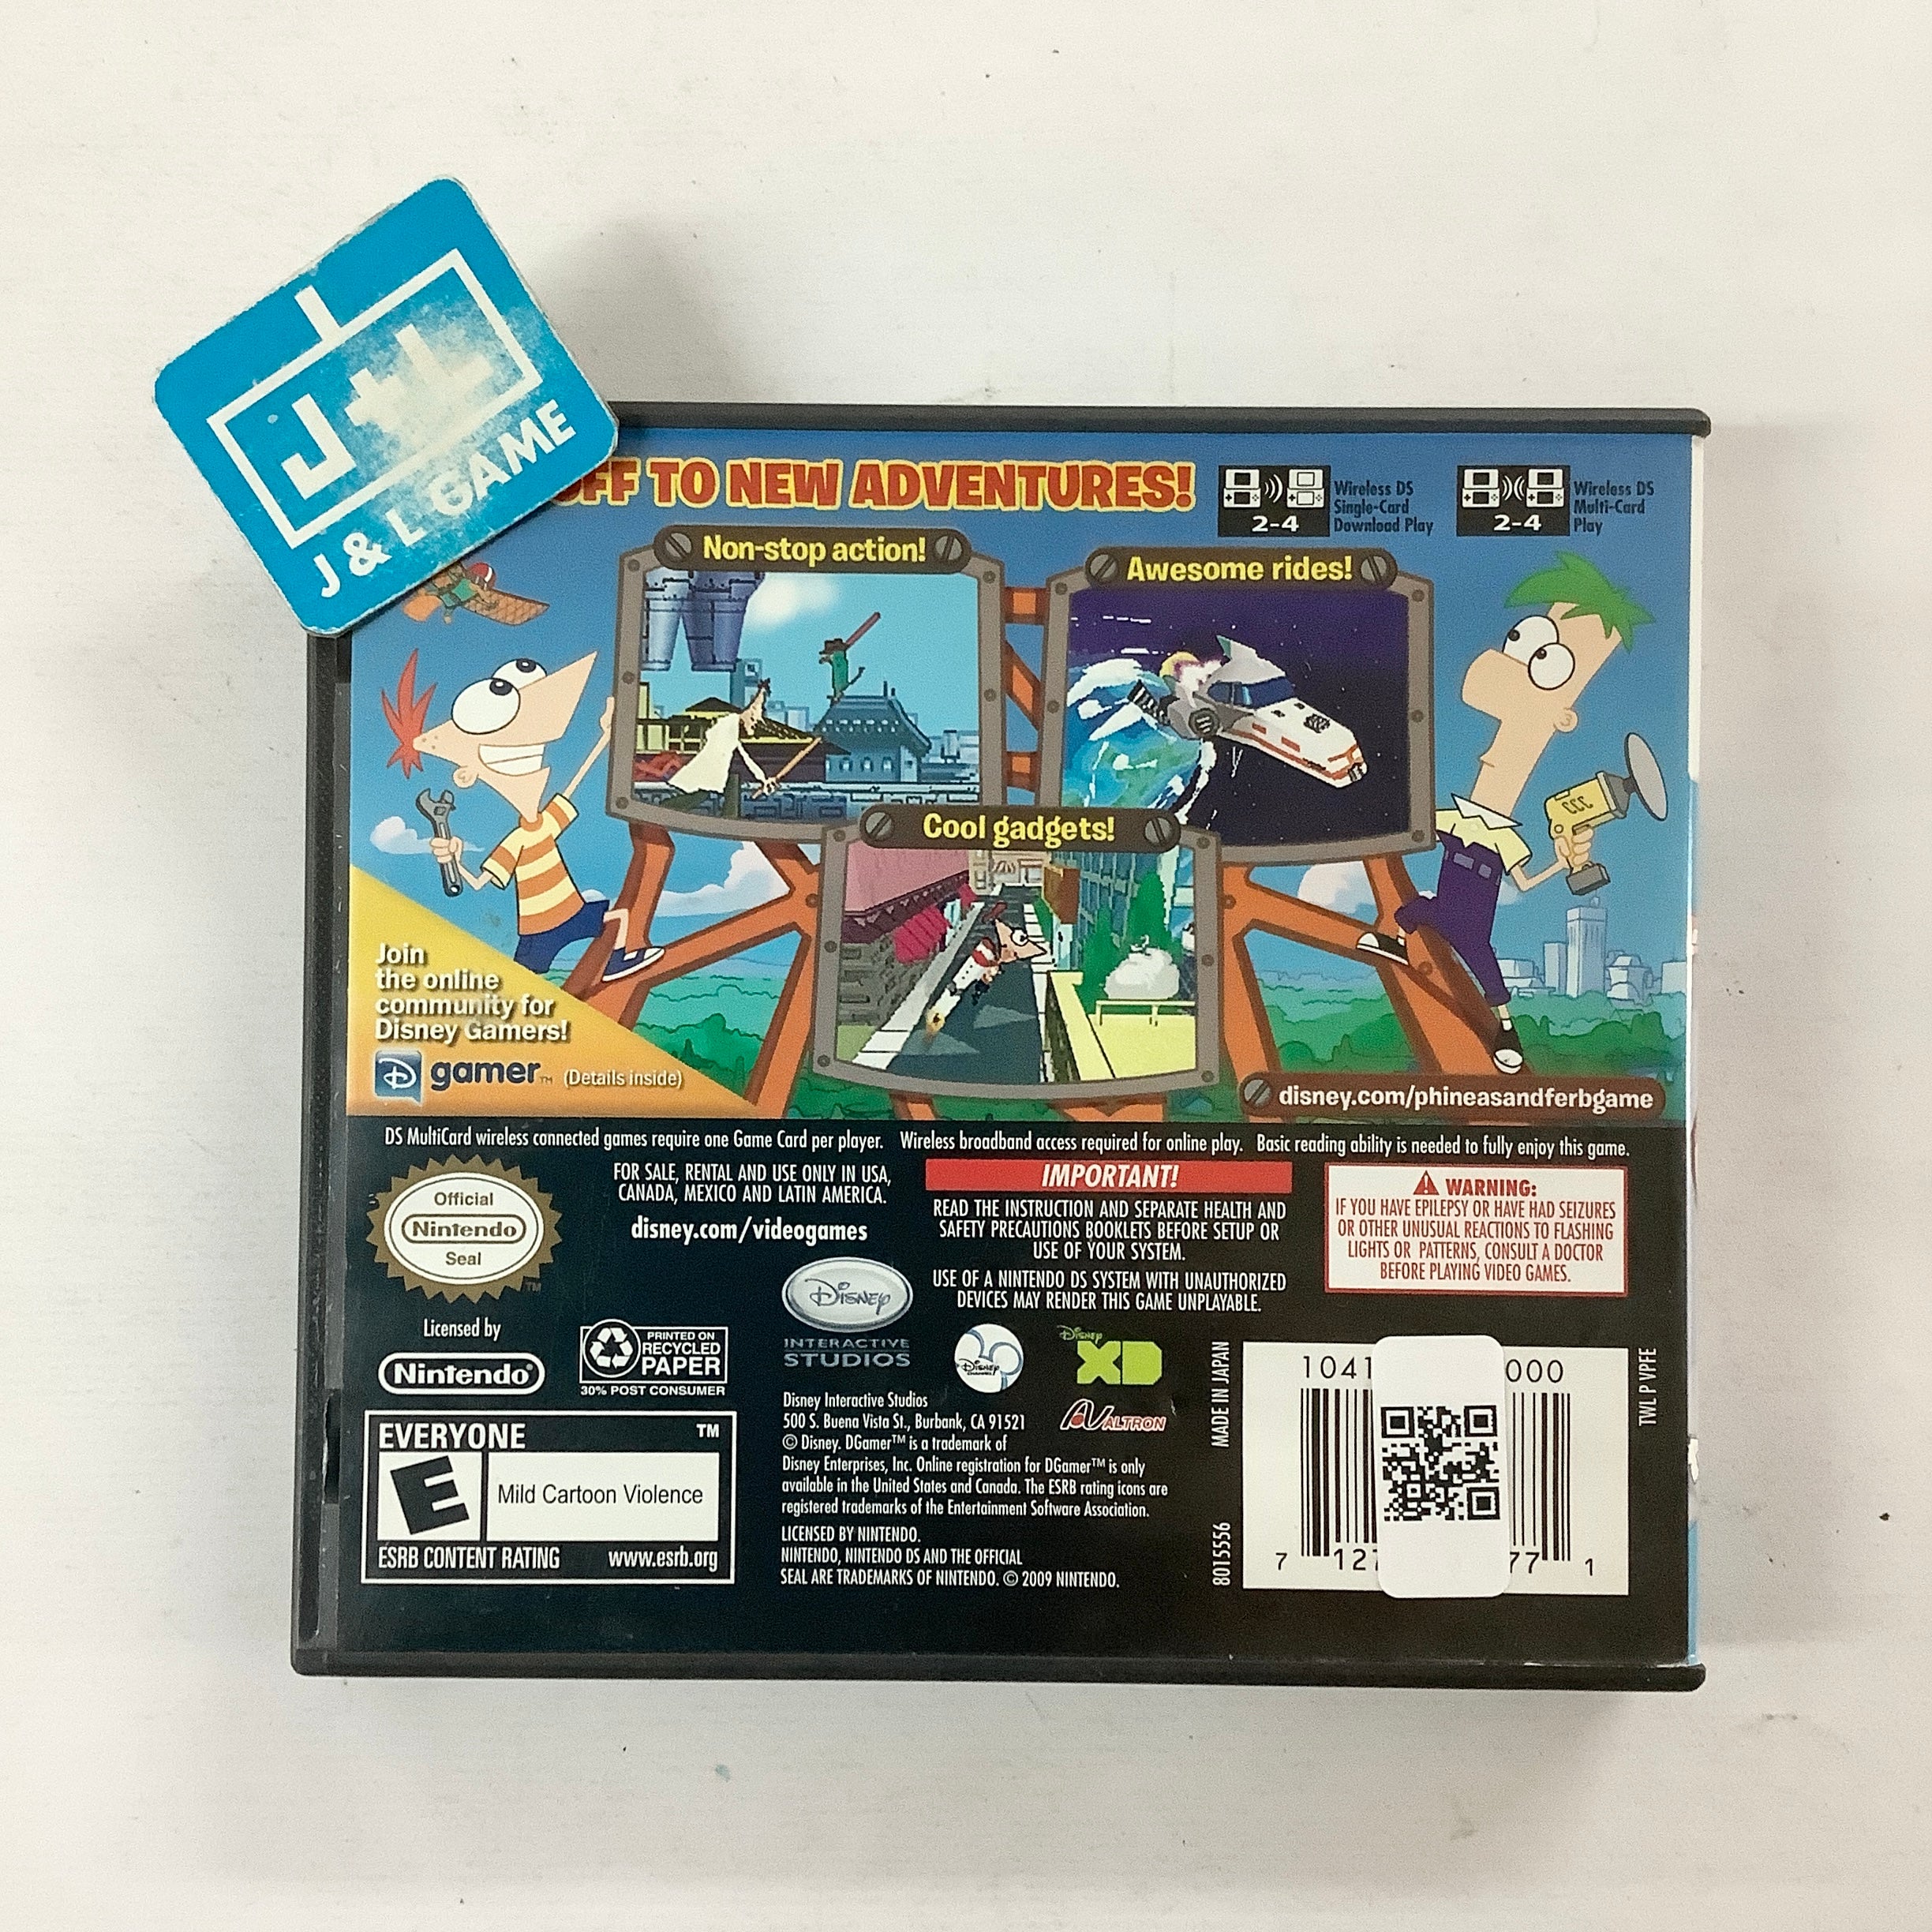 Phineas and Ferb Ride Again - (NDS) Nintendo DS [Pre-Owned] Video Games Disney Interactive Studios   